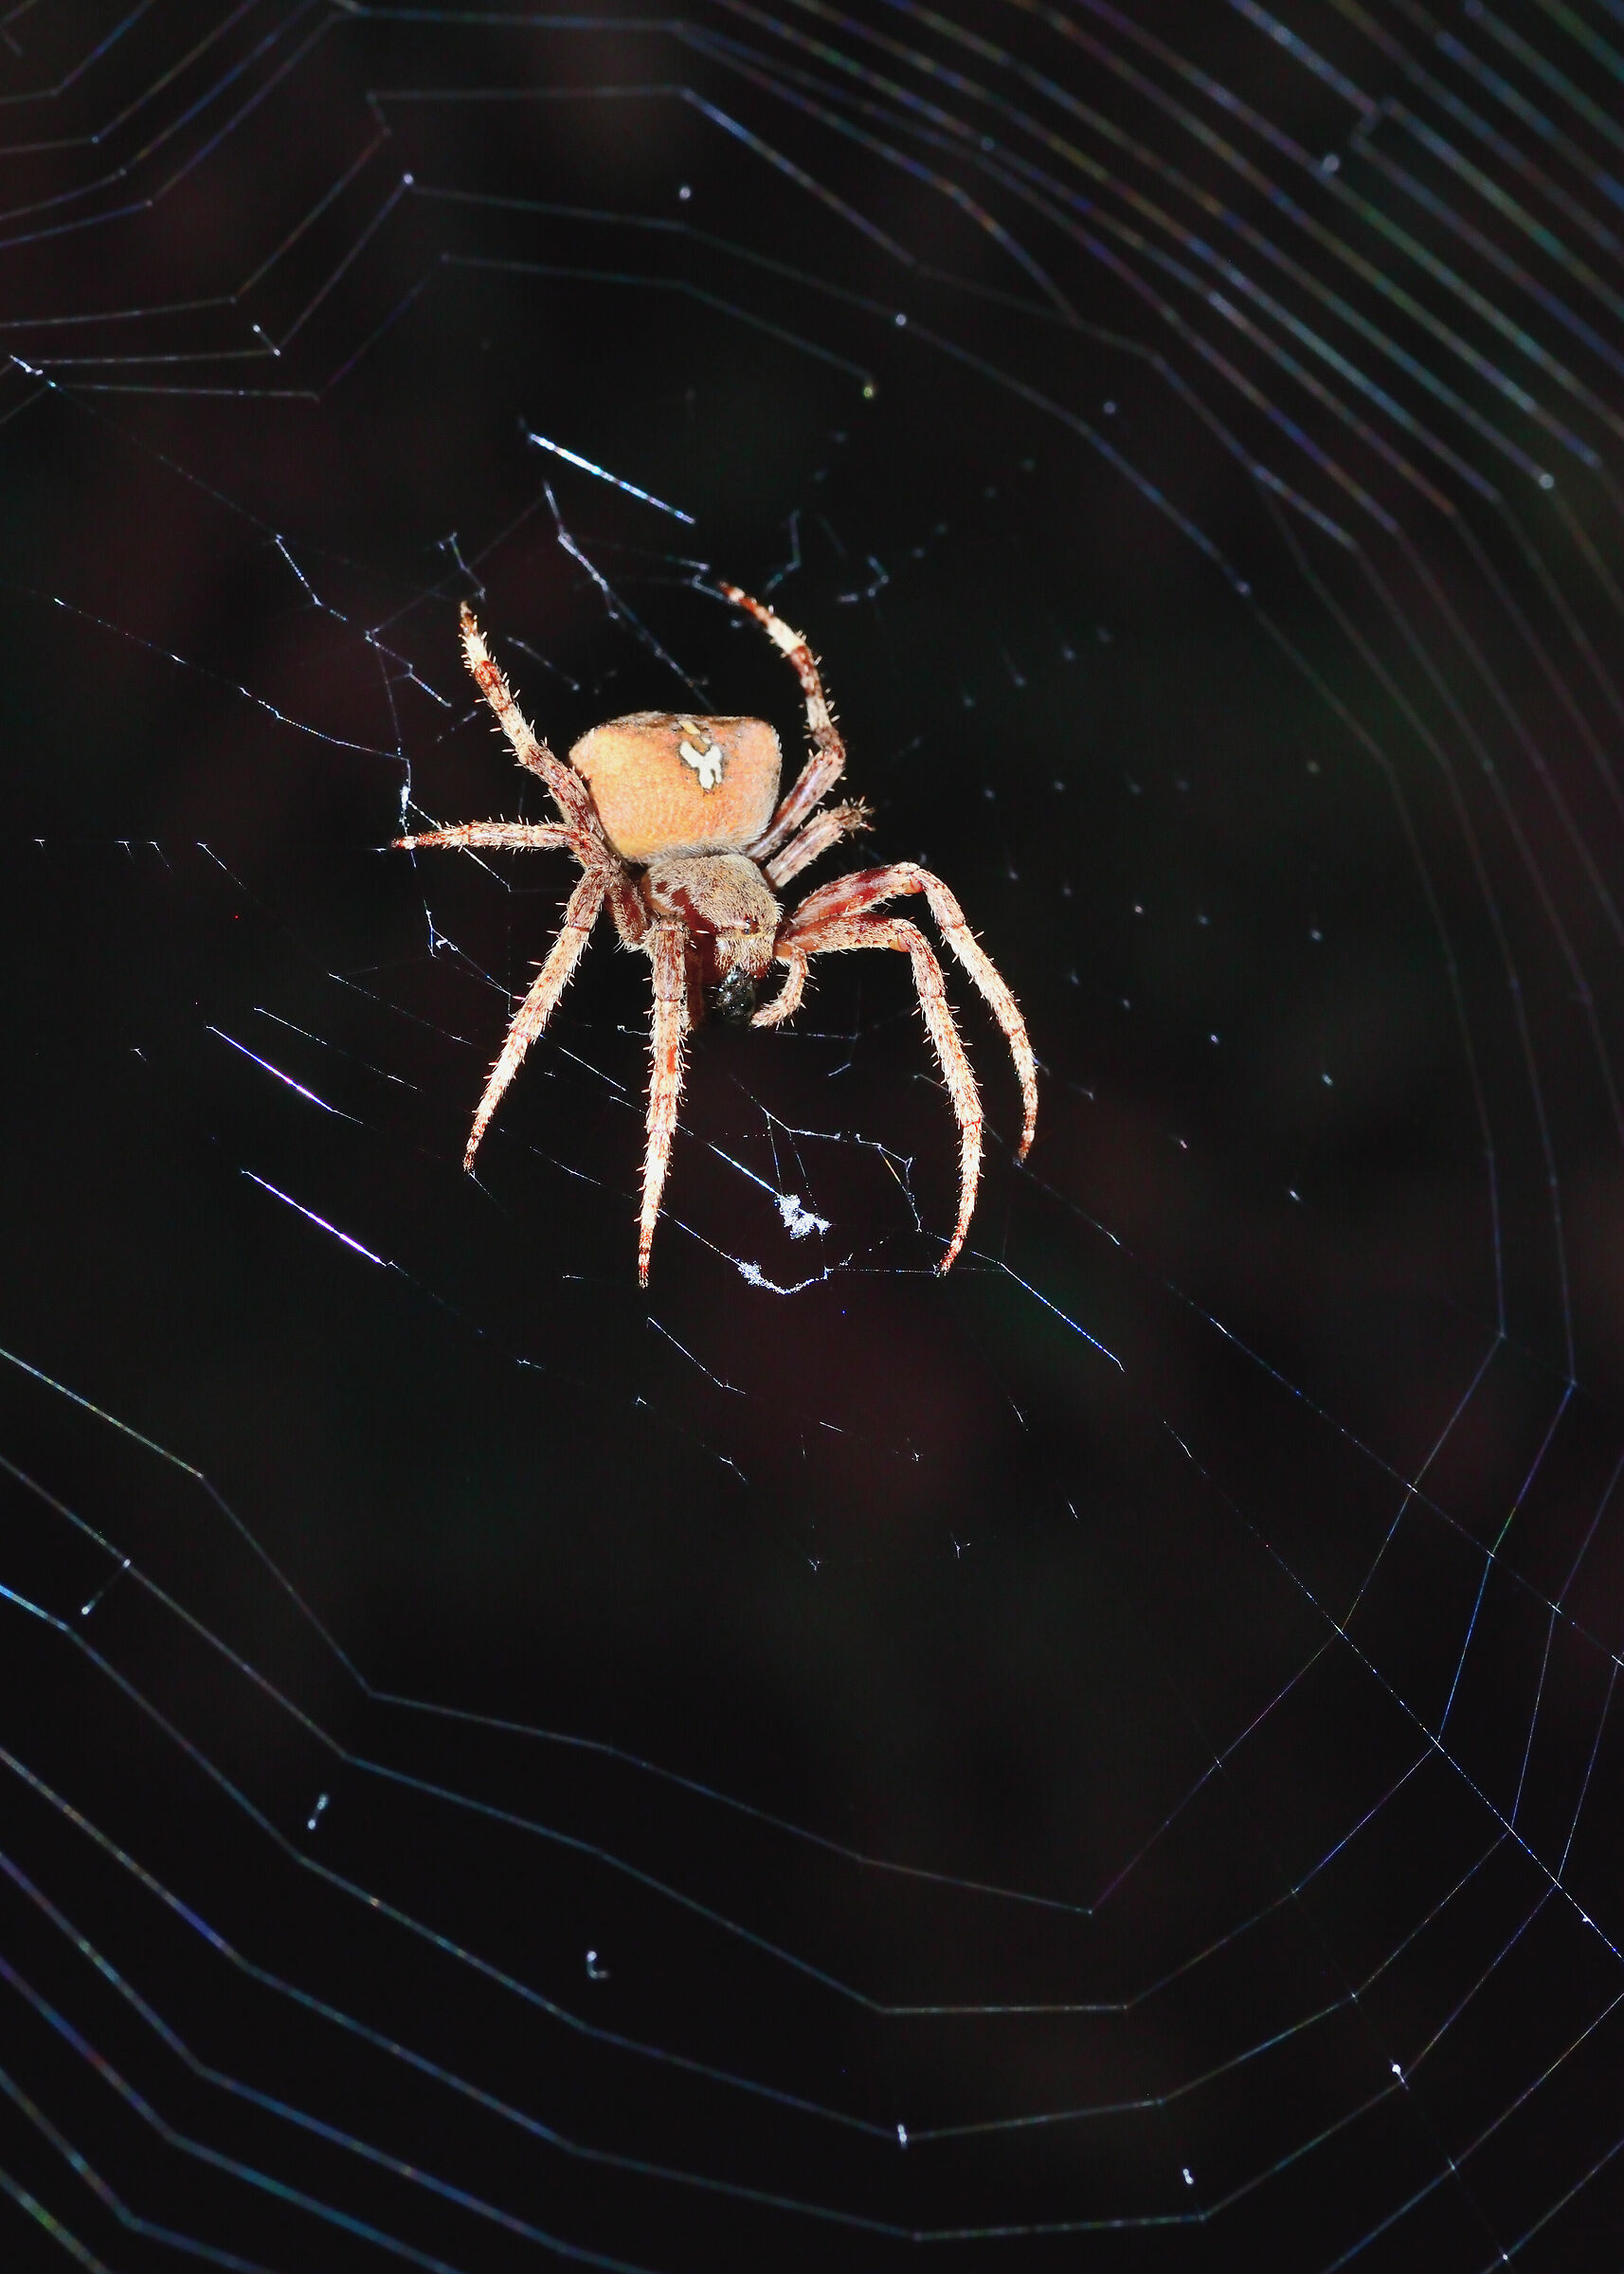 Spider by night - Side A...